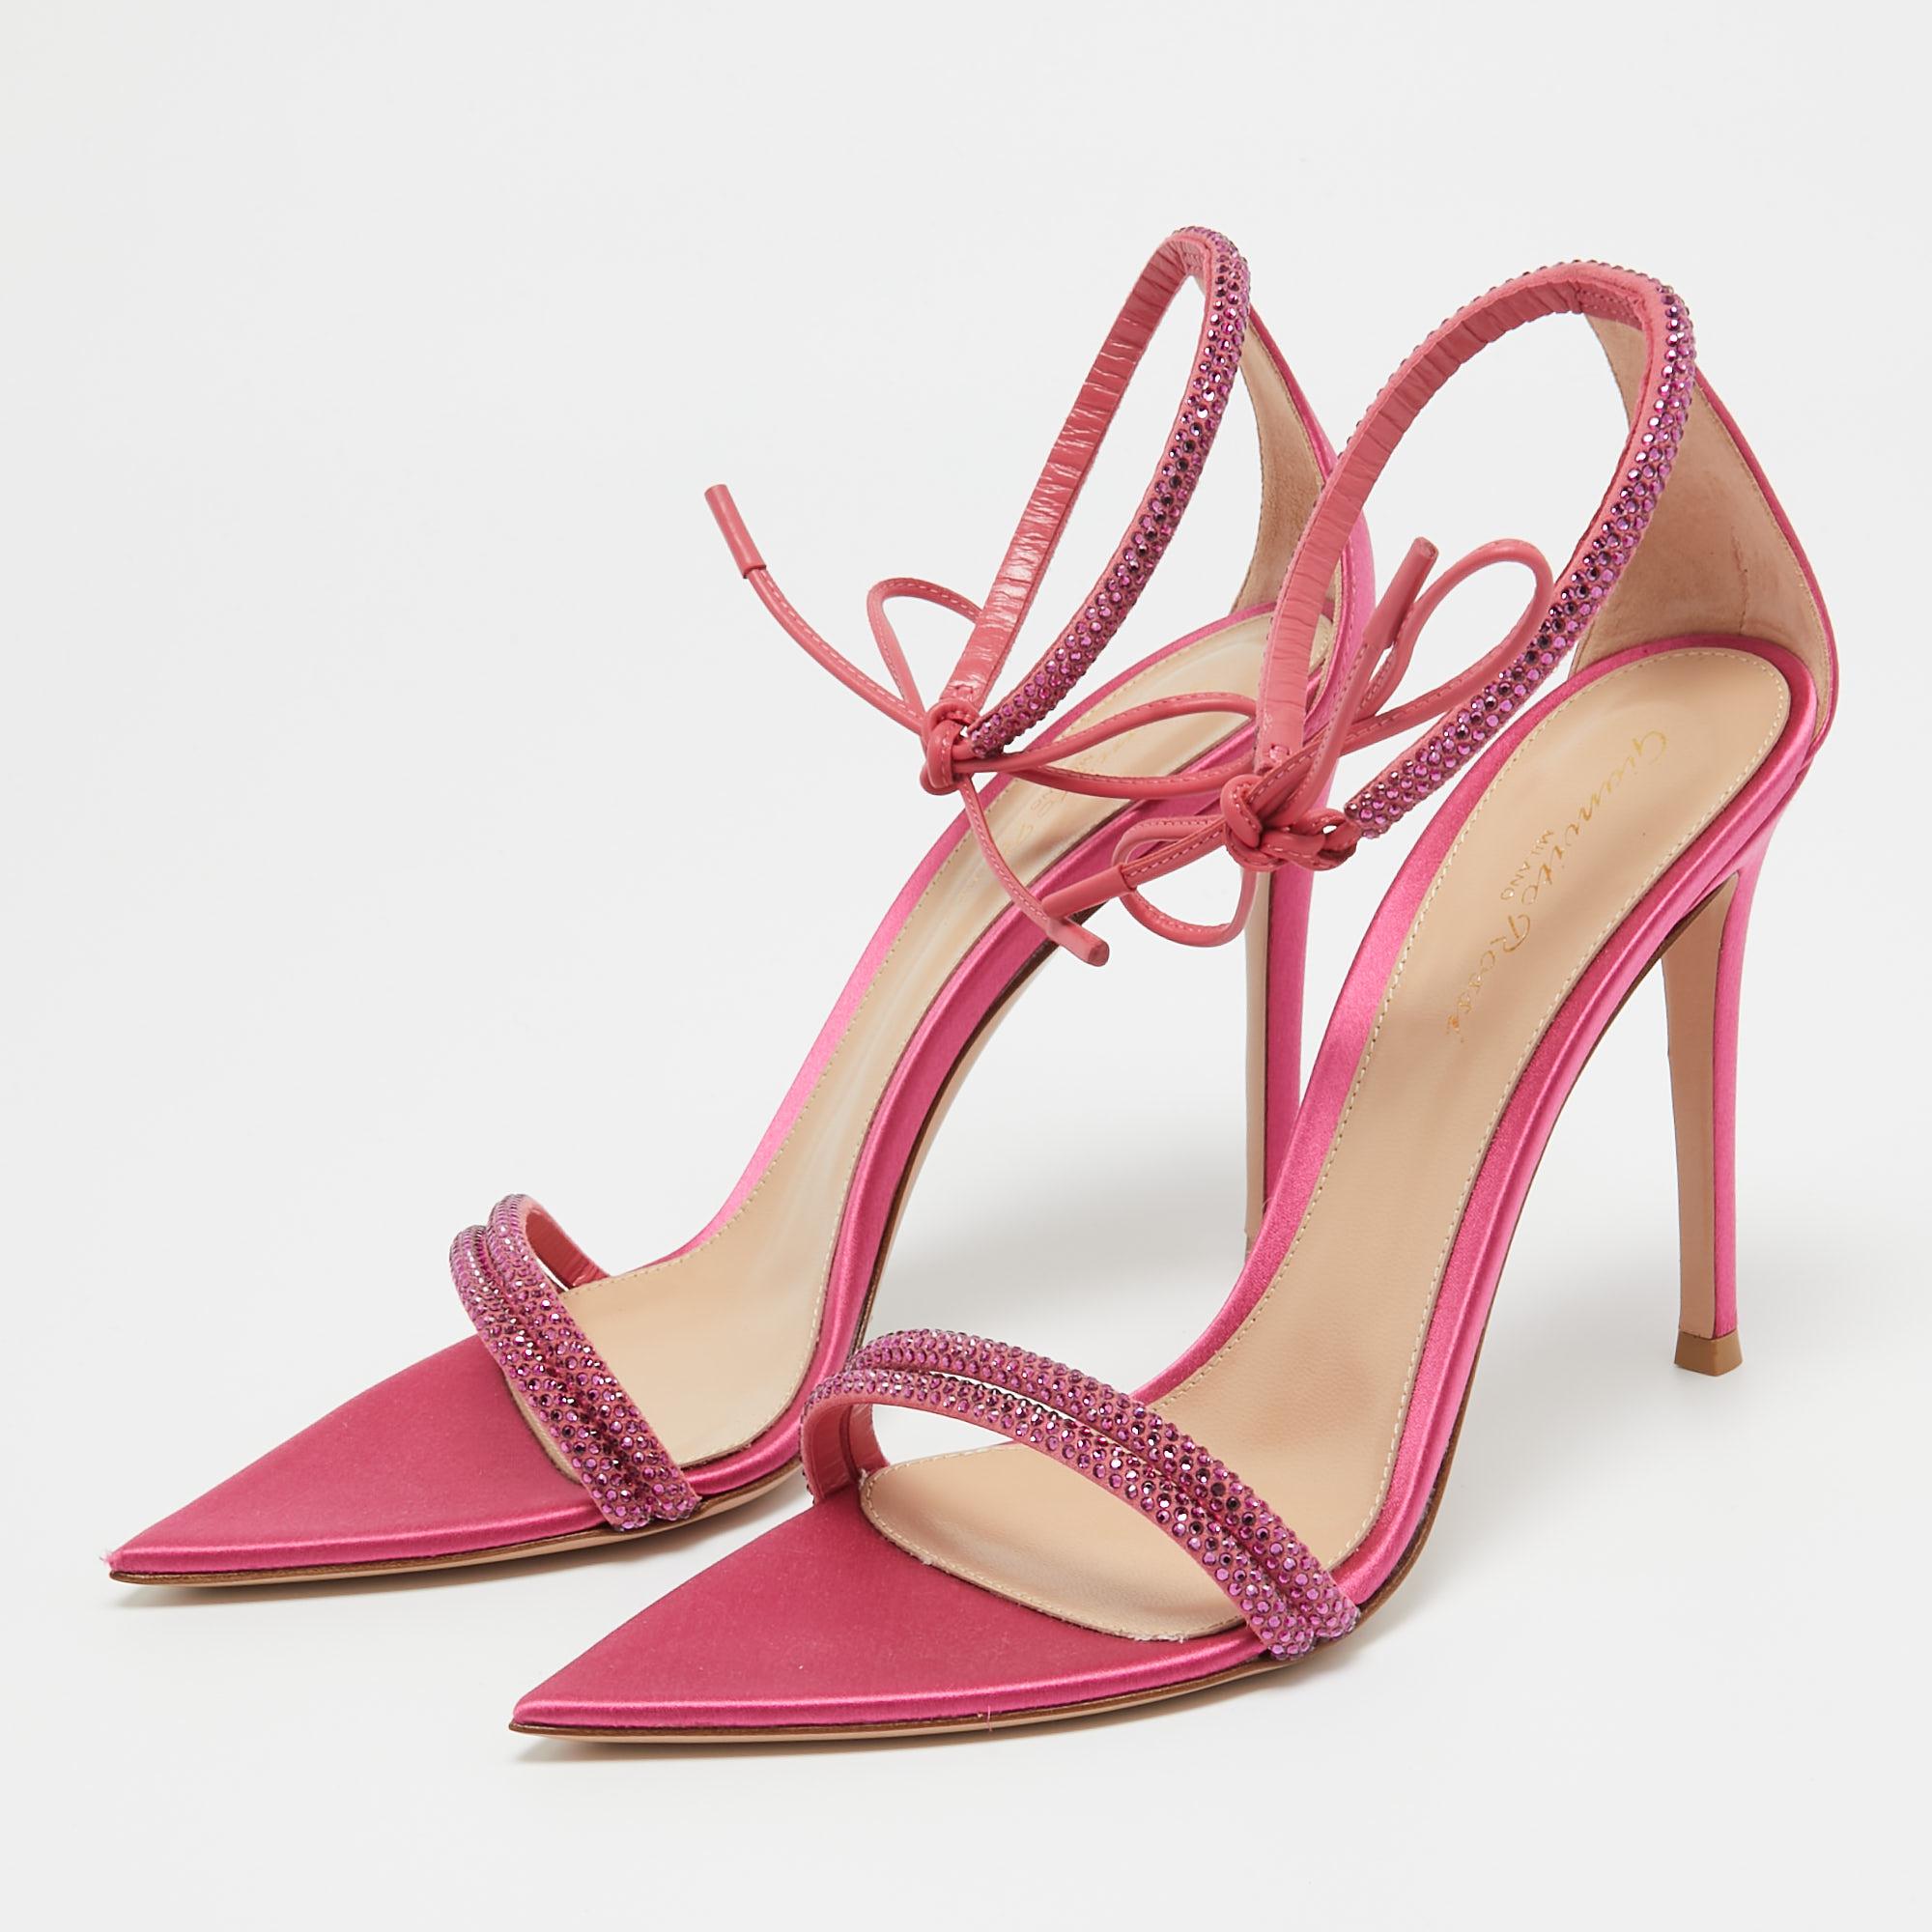 Gianvito Rossi Pink Satin Embellished Montecarlo Sandals Size 38.5 For Sale 1